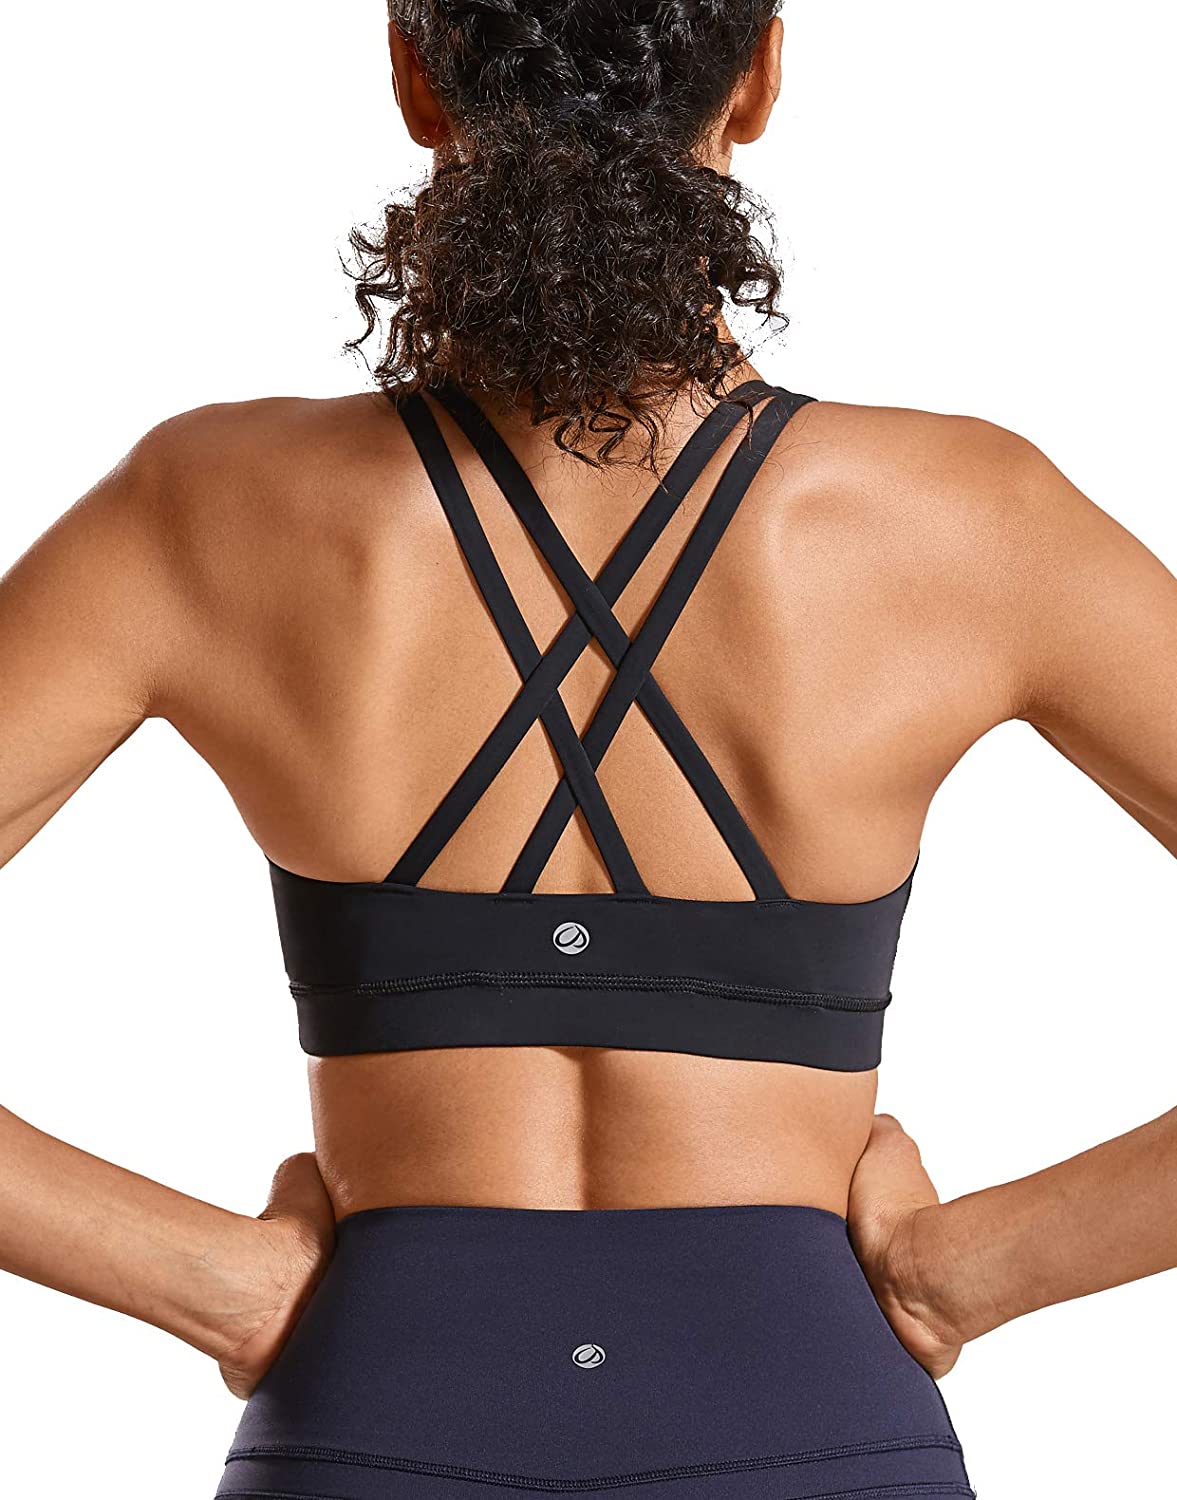 CRZ YOGA Strappy Padded Sports Bra for Women Activewear Medium Support  Workout Y | eBay